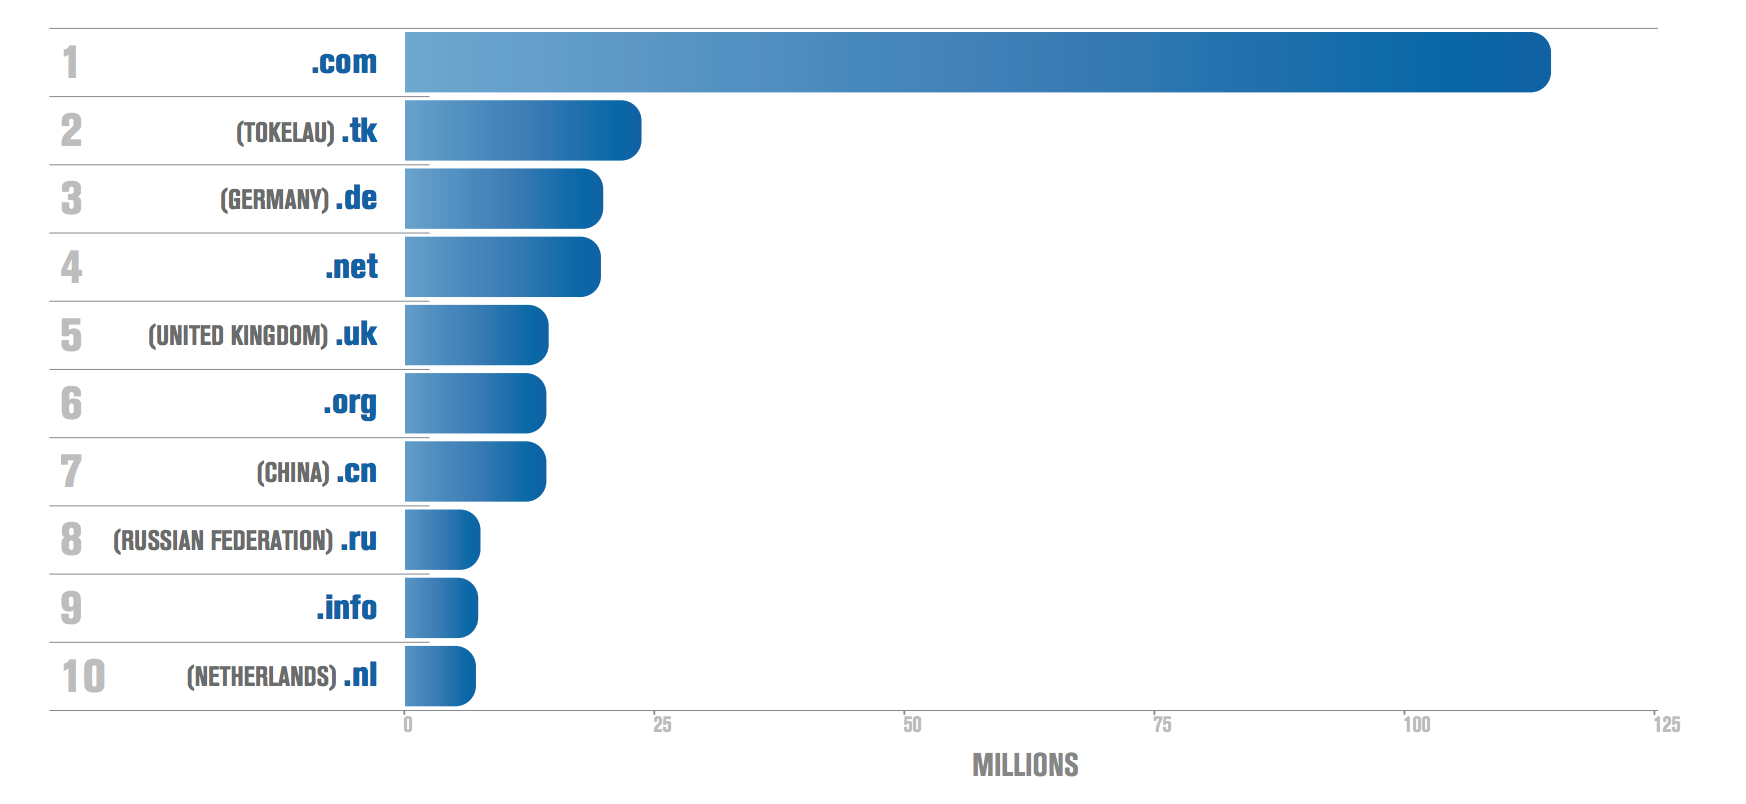 Q1 2014 TLDs by Zone Size